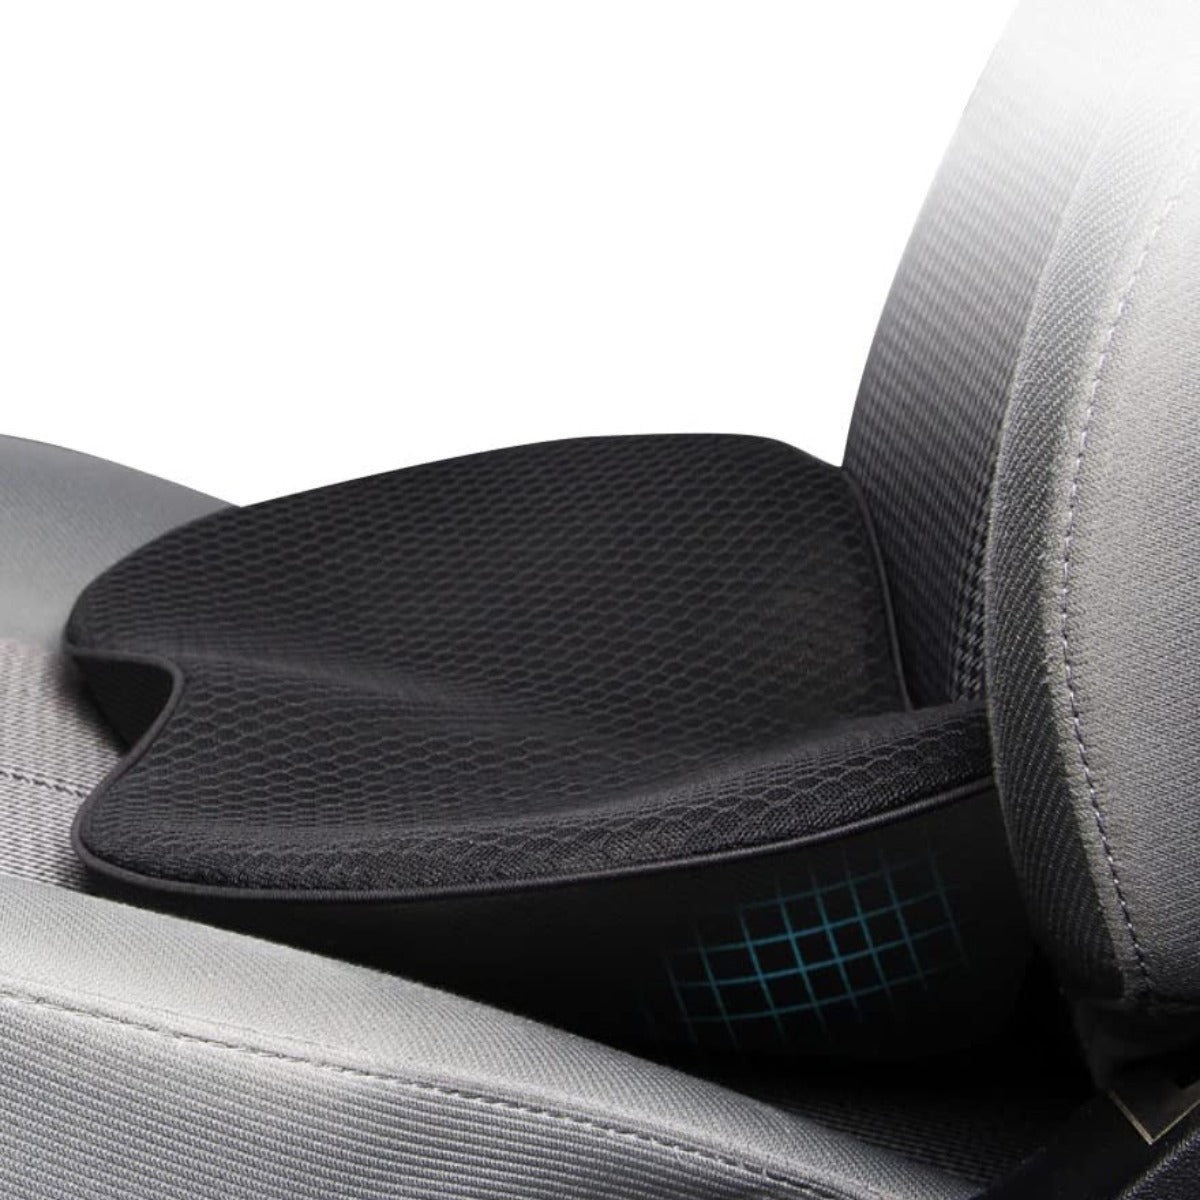 Car Booster Seat Cushion Raise The Height for Short People Driving Hip  (Tailbone) and Lower Cack Fatigue Relief Suitable for Trucks, Cars, SUVs